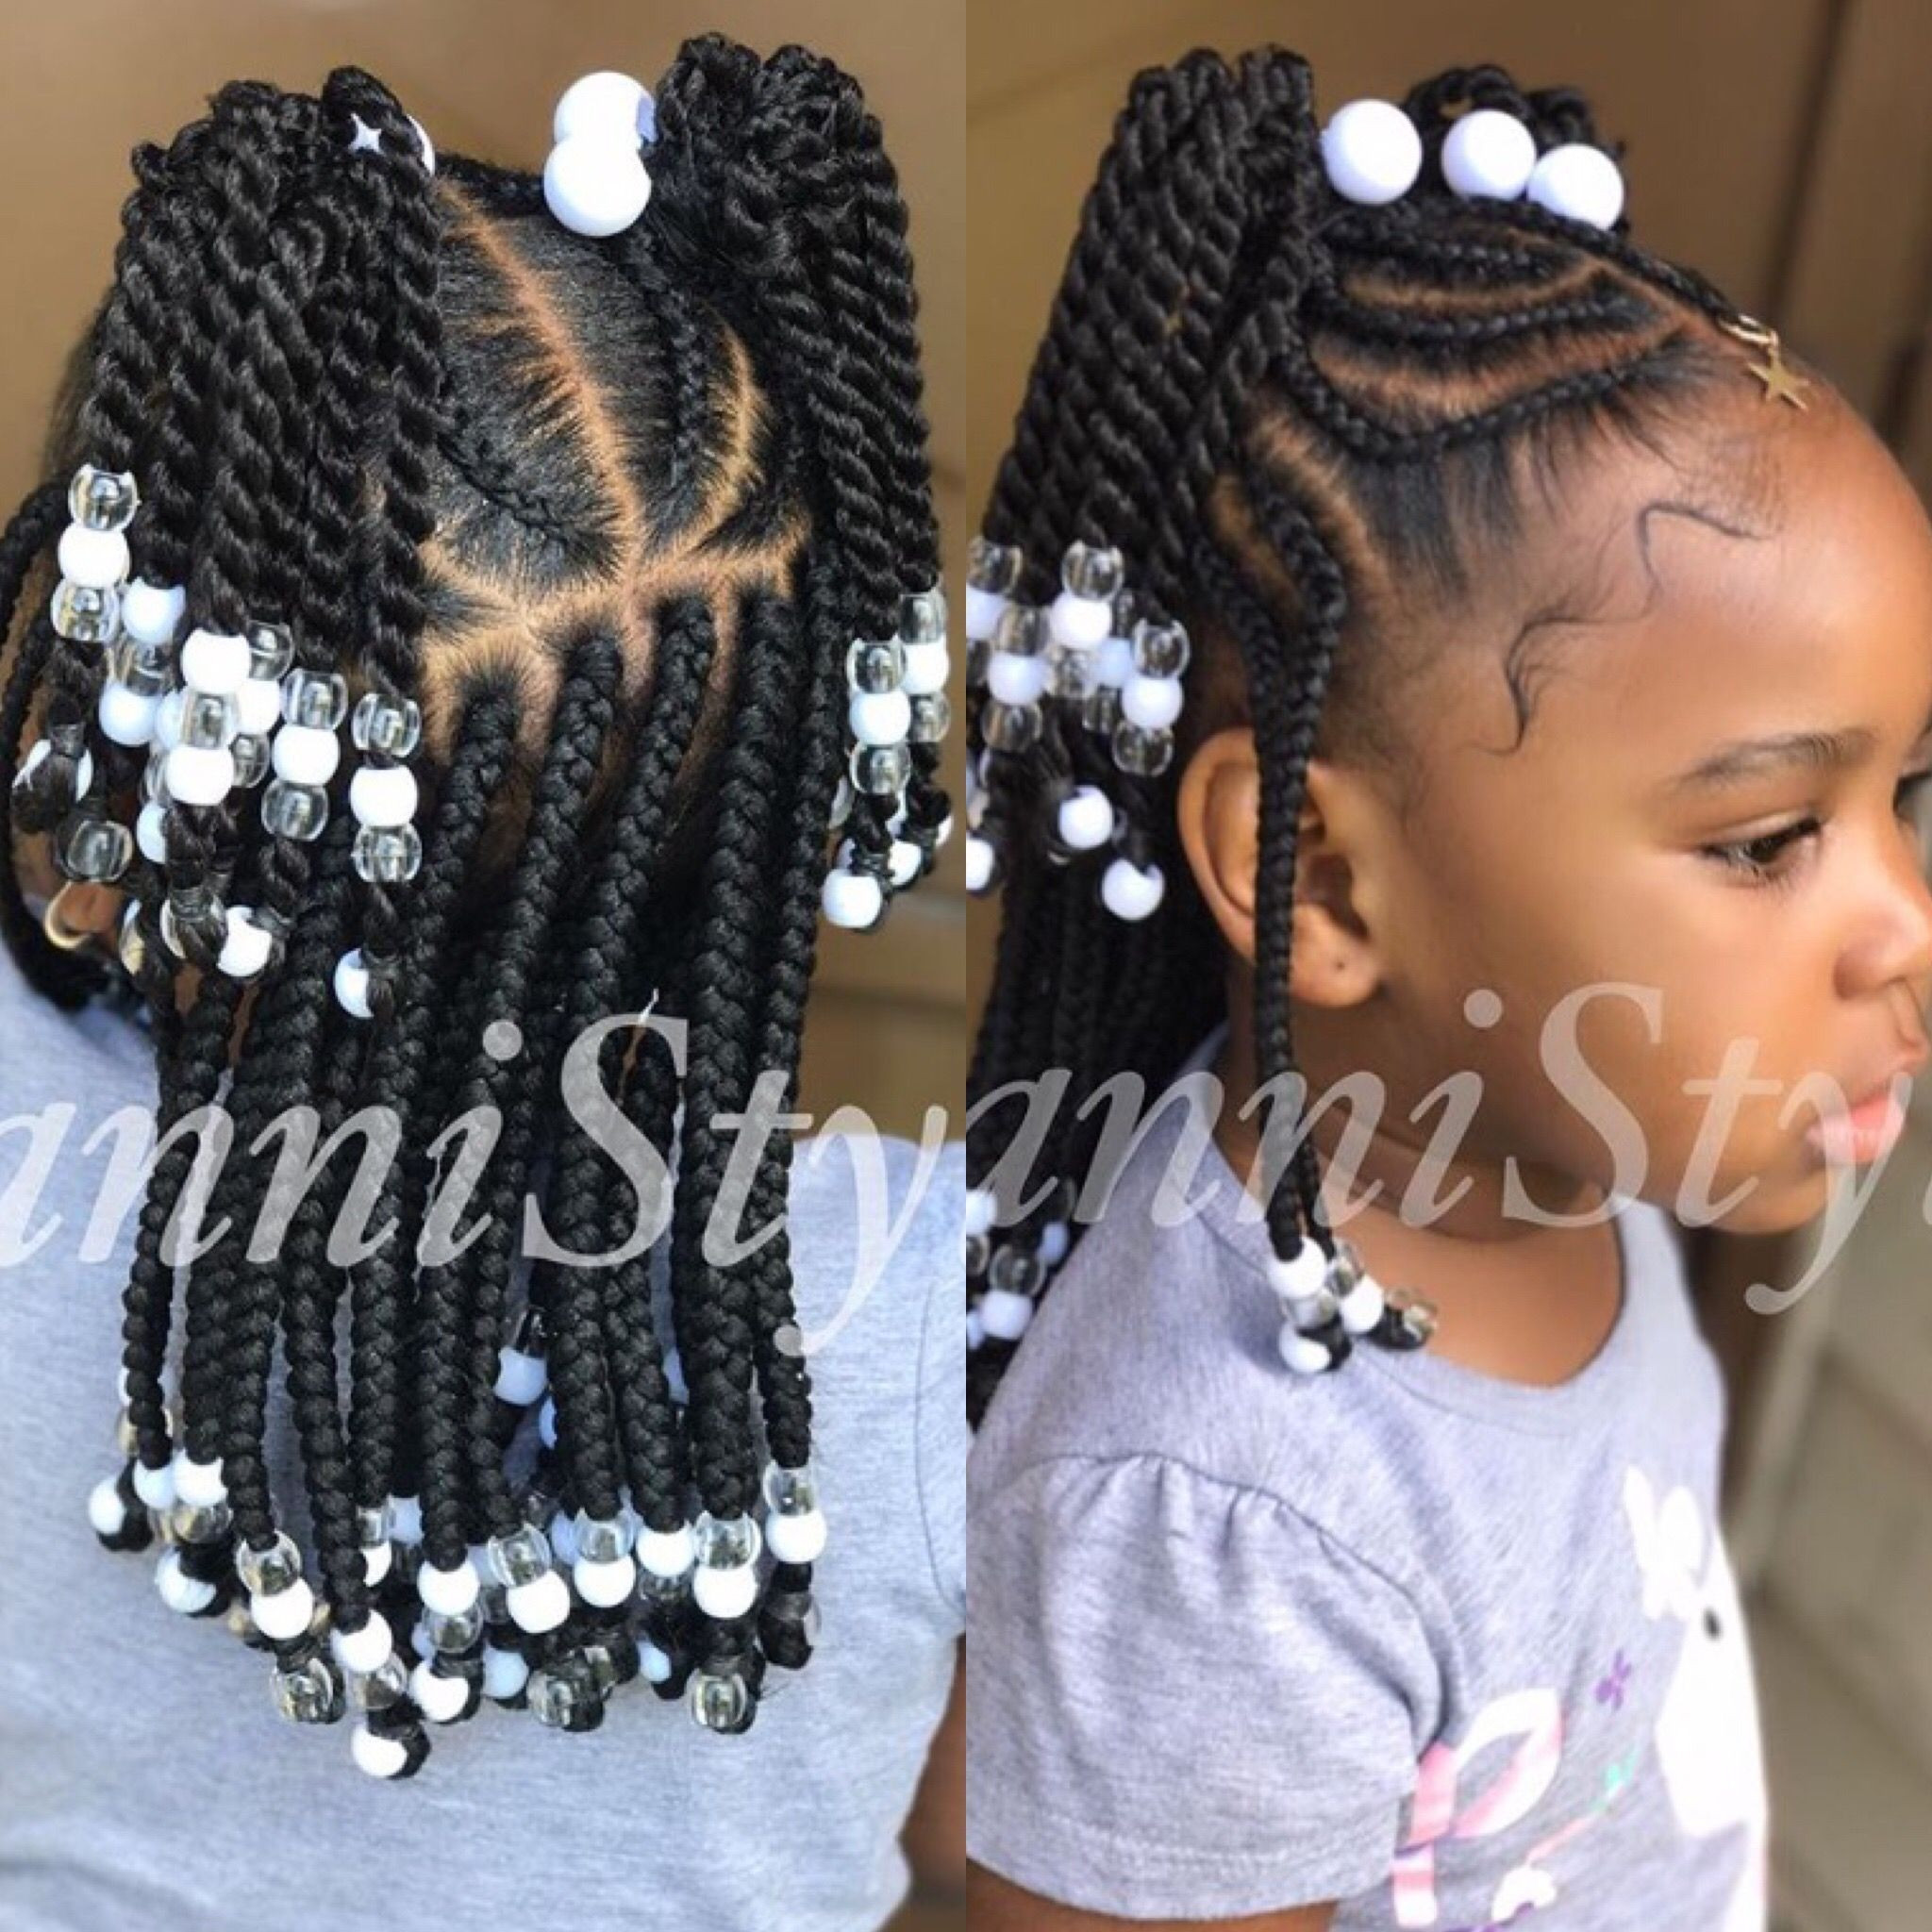 Braided Hairstyles For Little Kids
 I love this